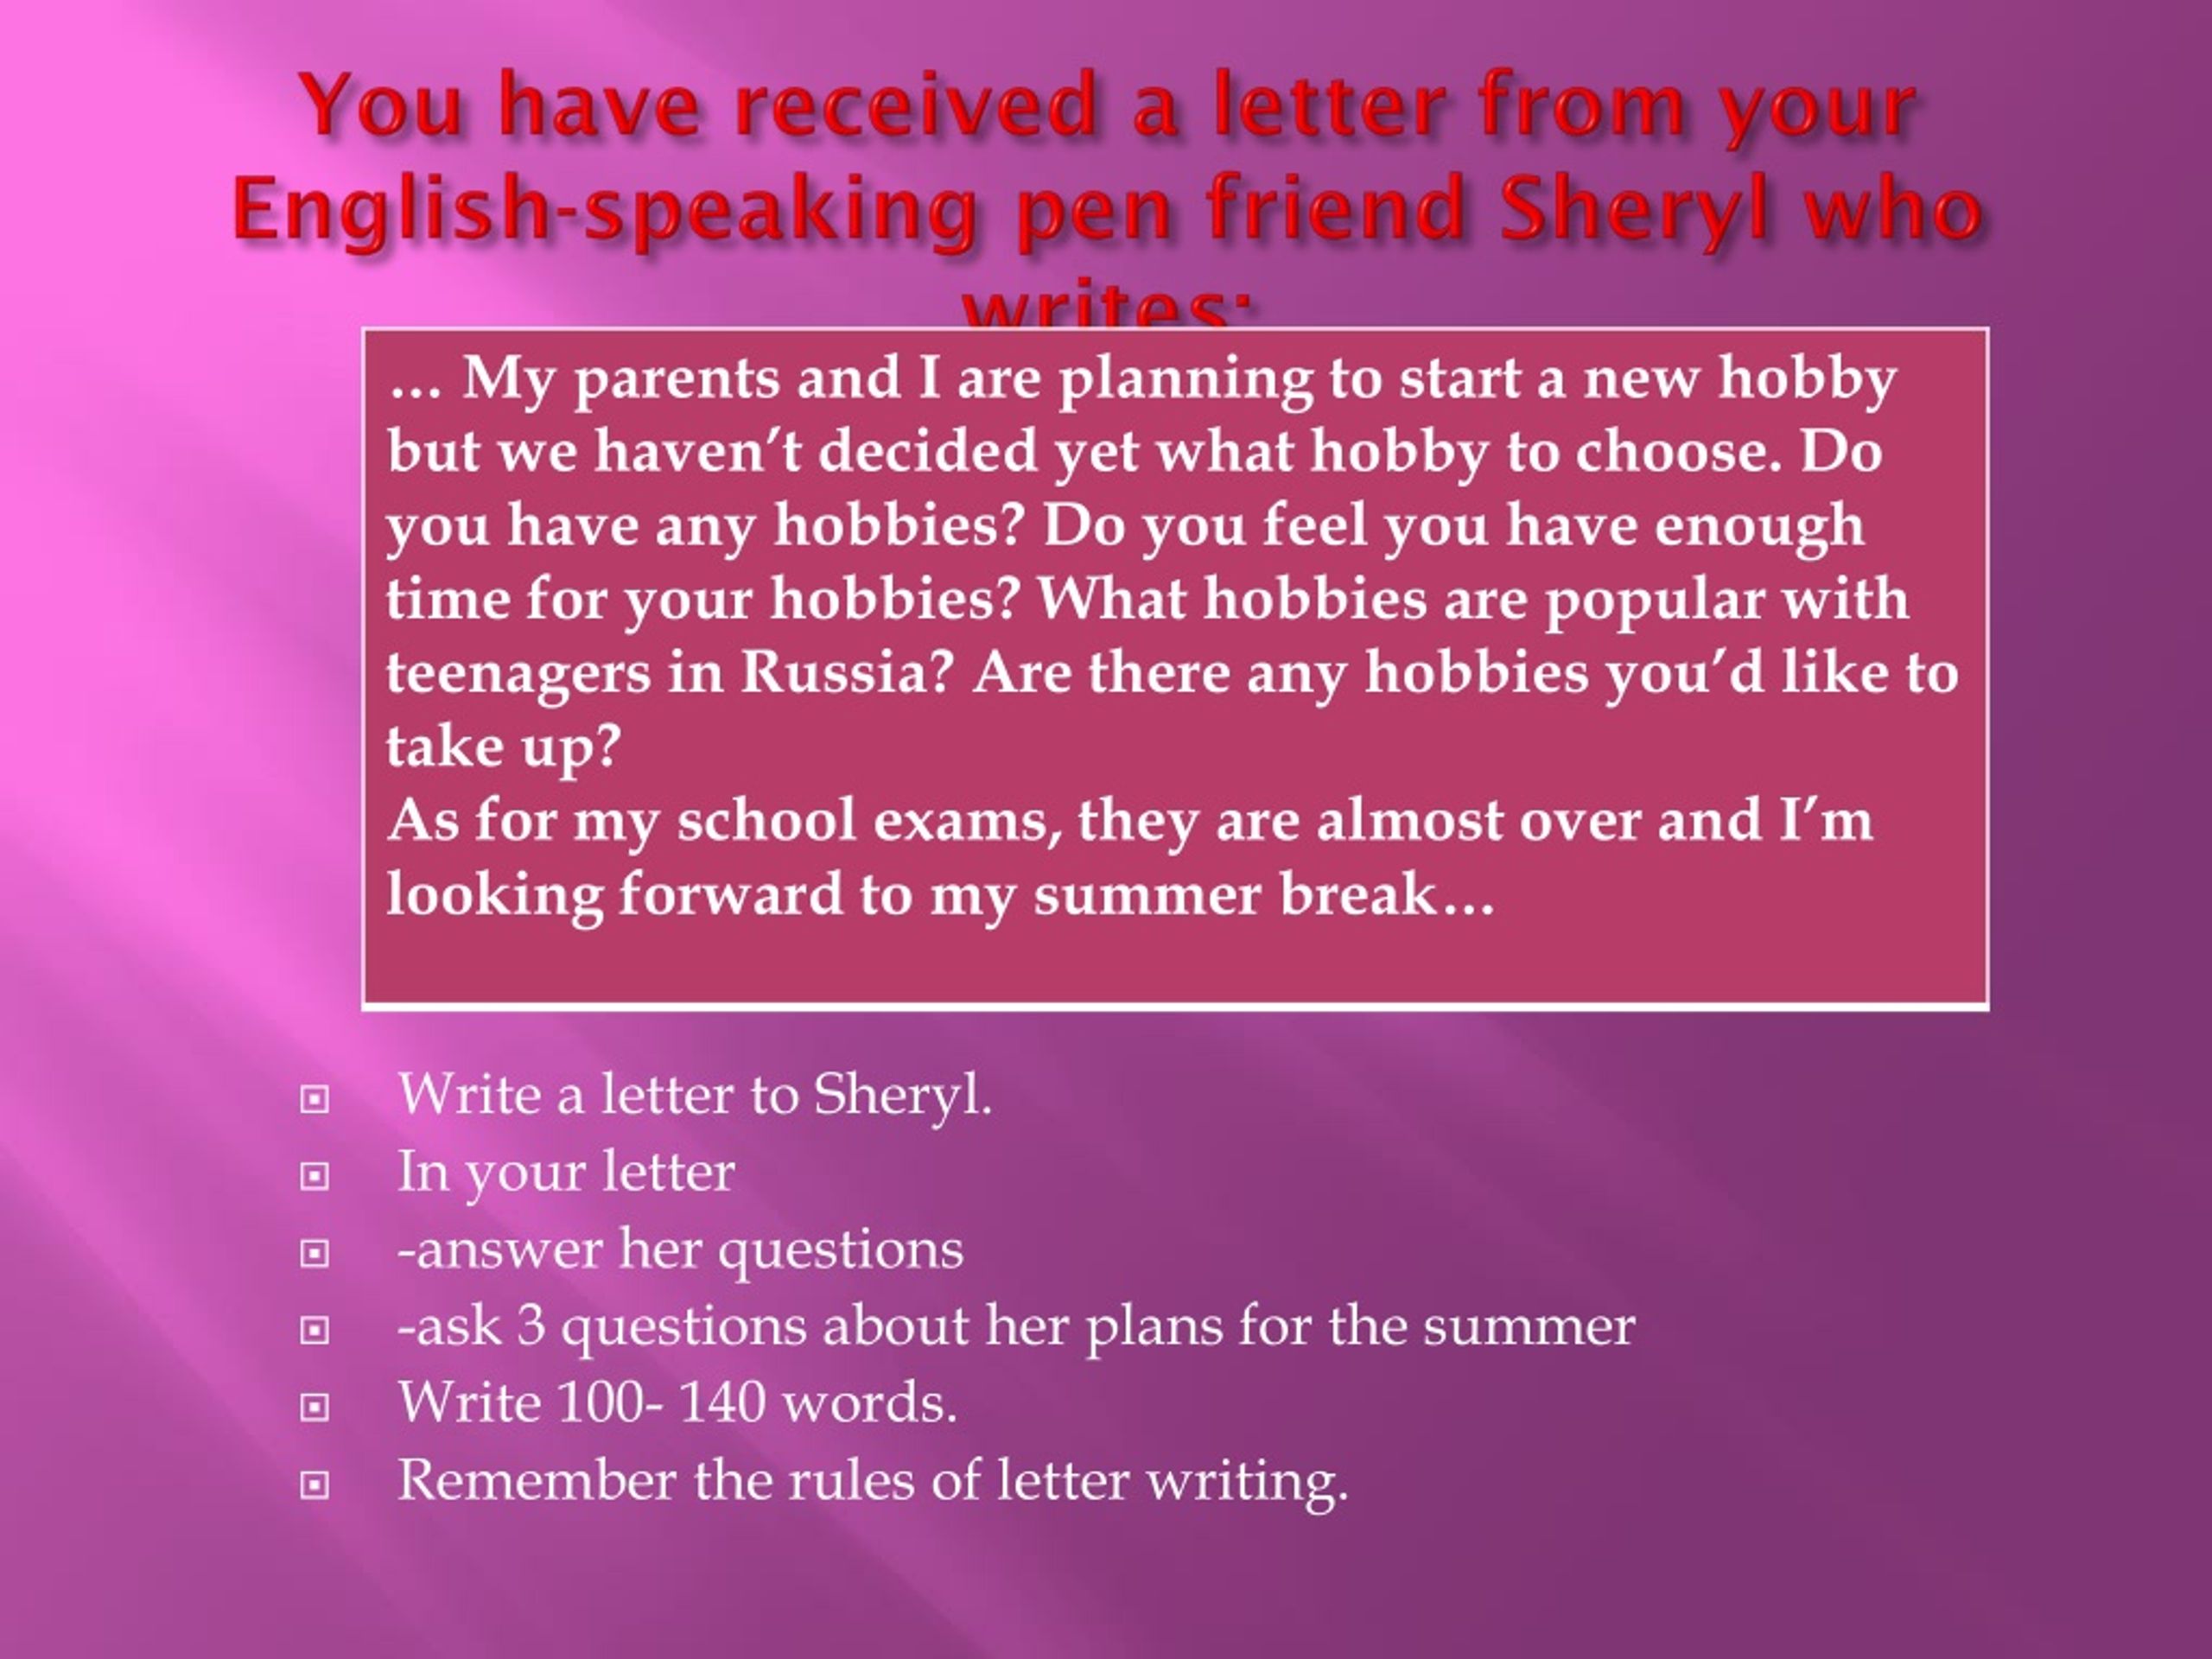 Do you wrote this letter